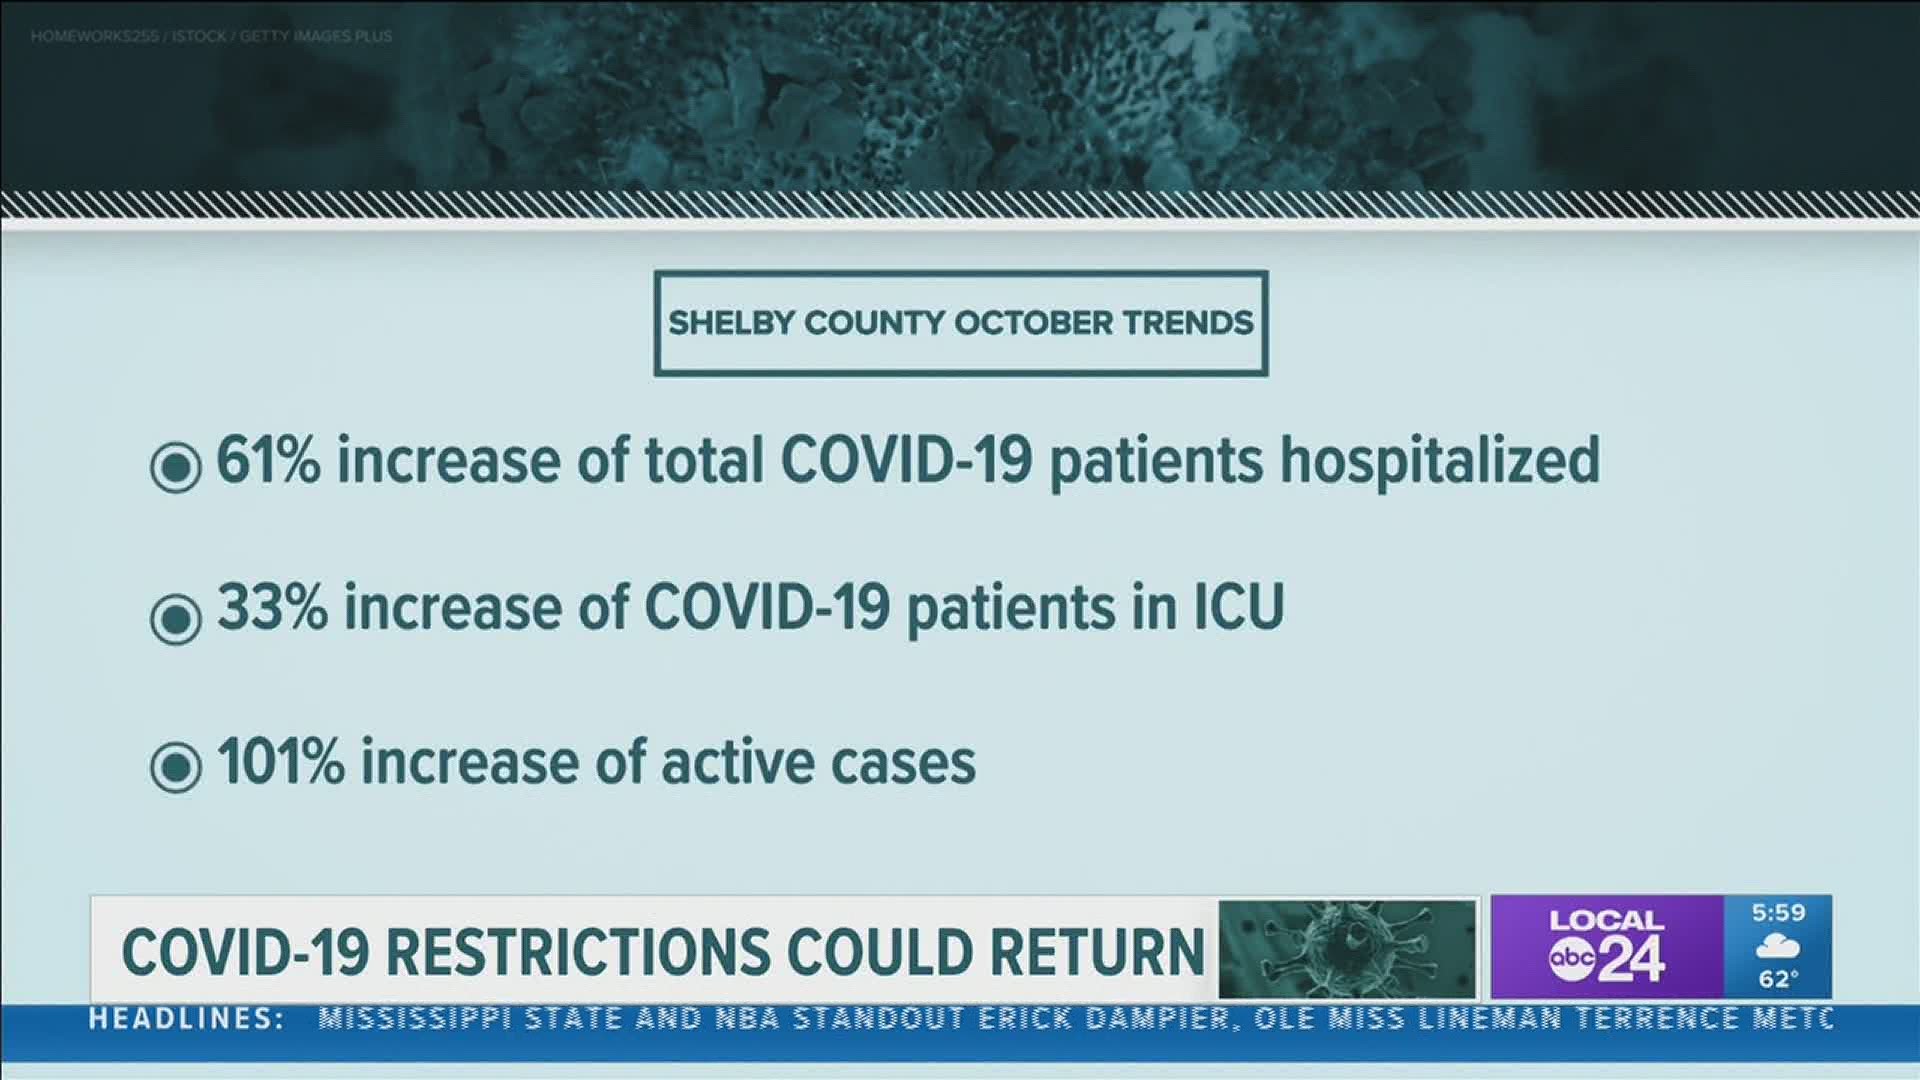 A surge of COVID-19 cases in surrounding counties and workplace transmissions are putting a new strain on Shelby County hospitals.